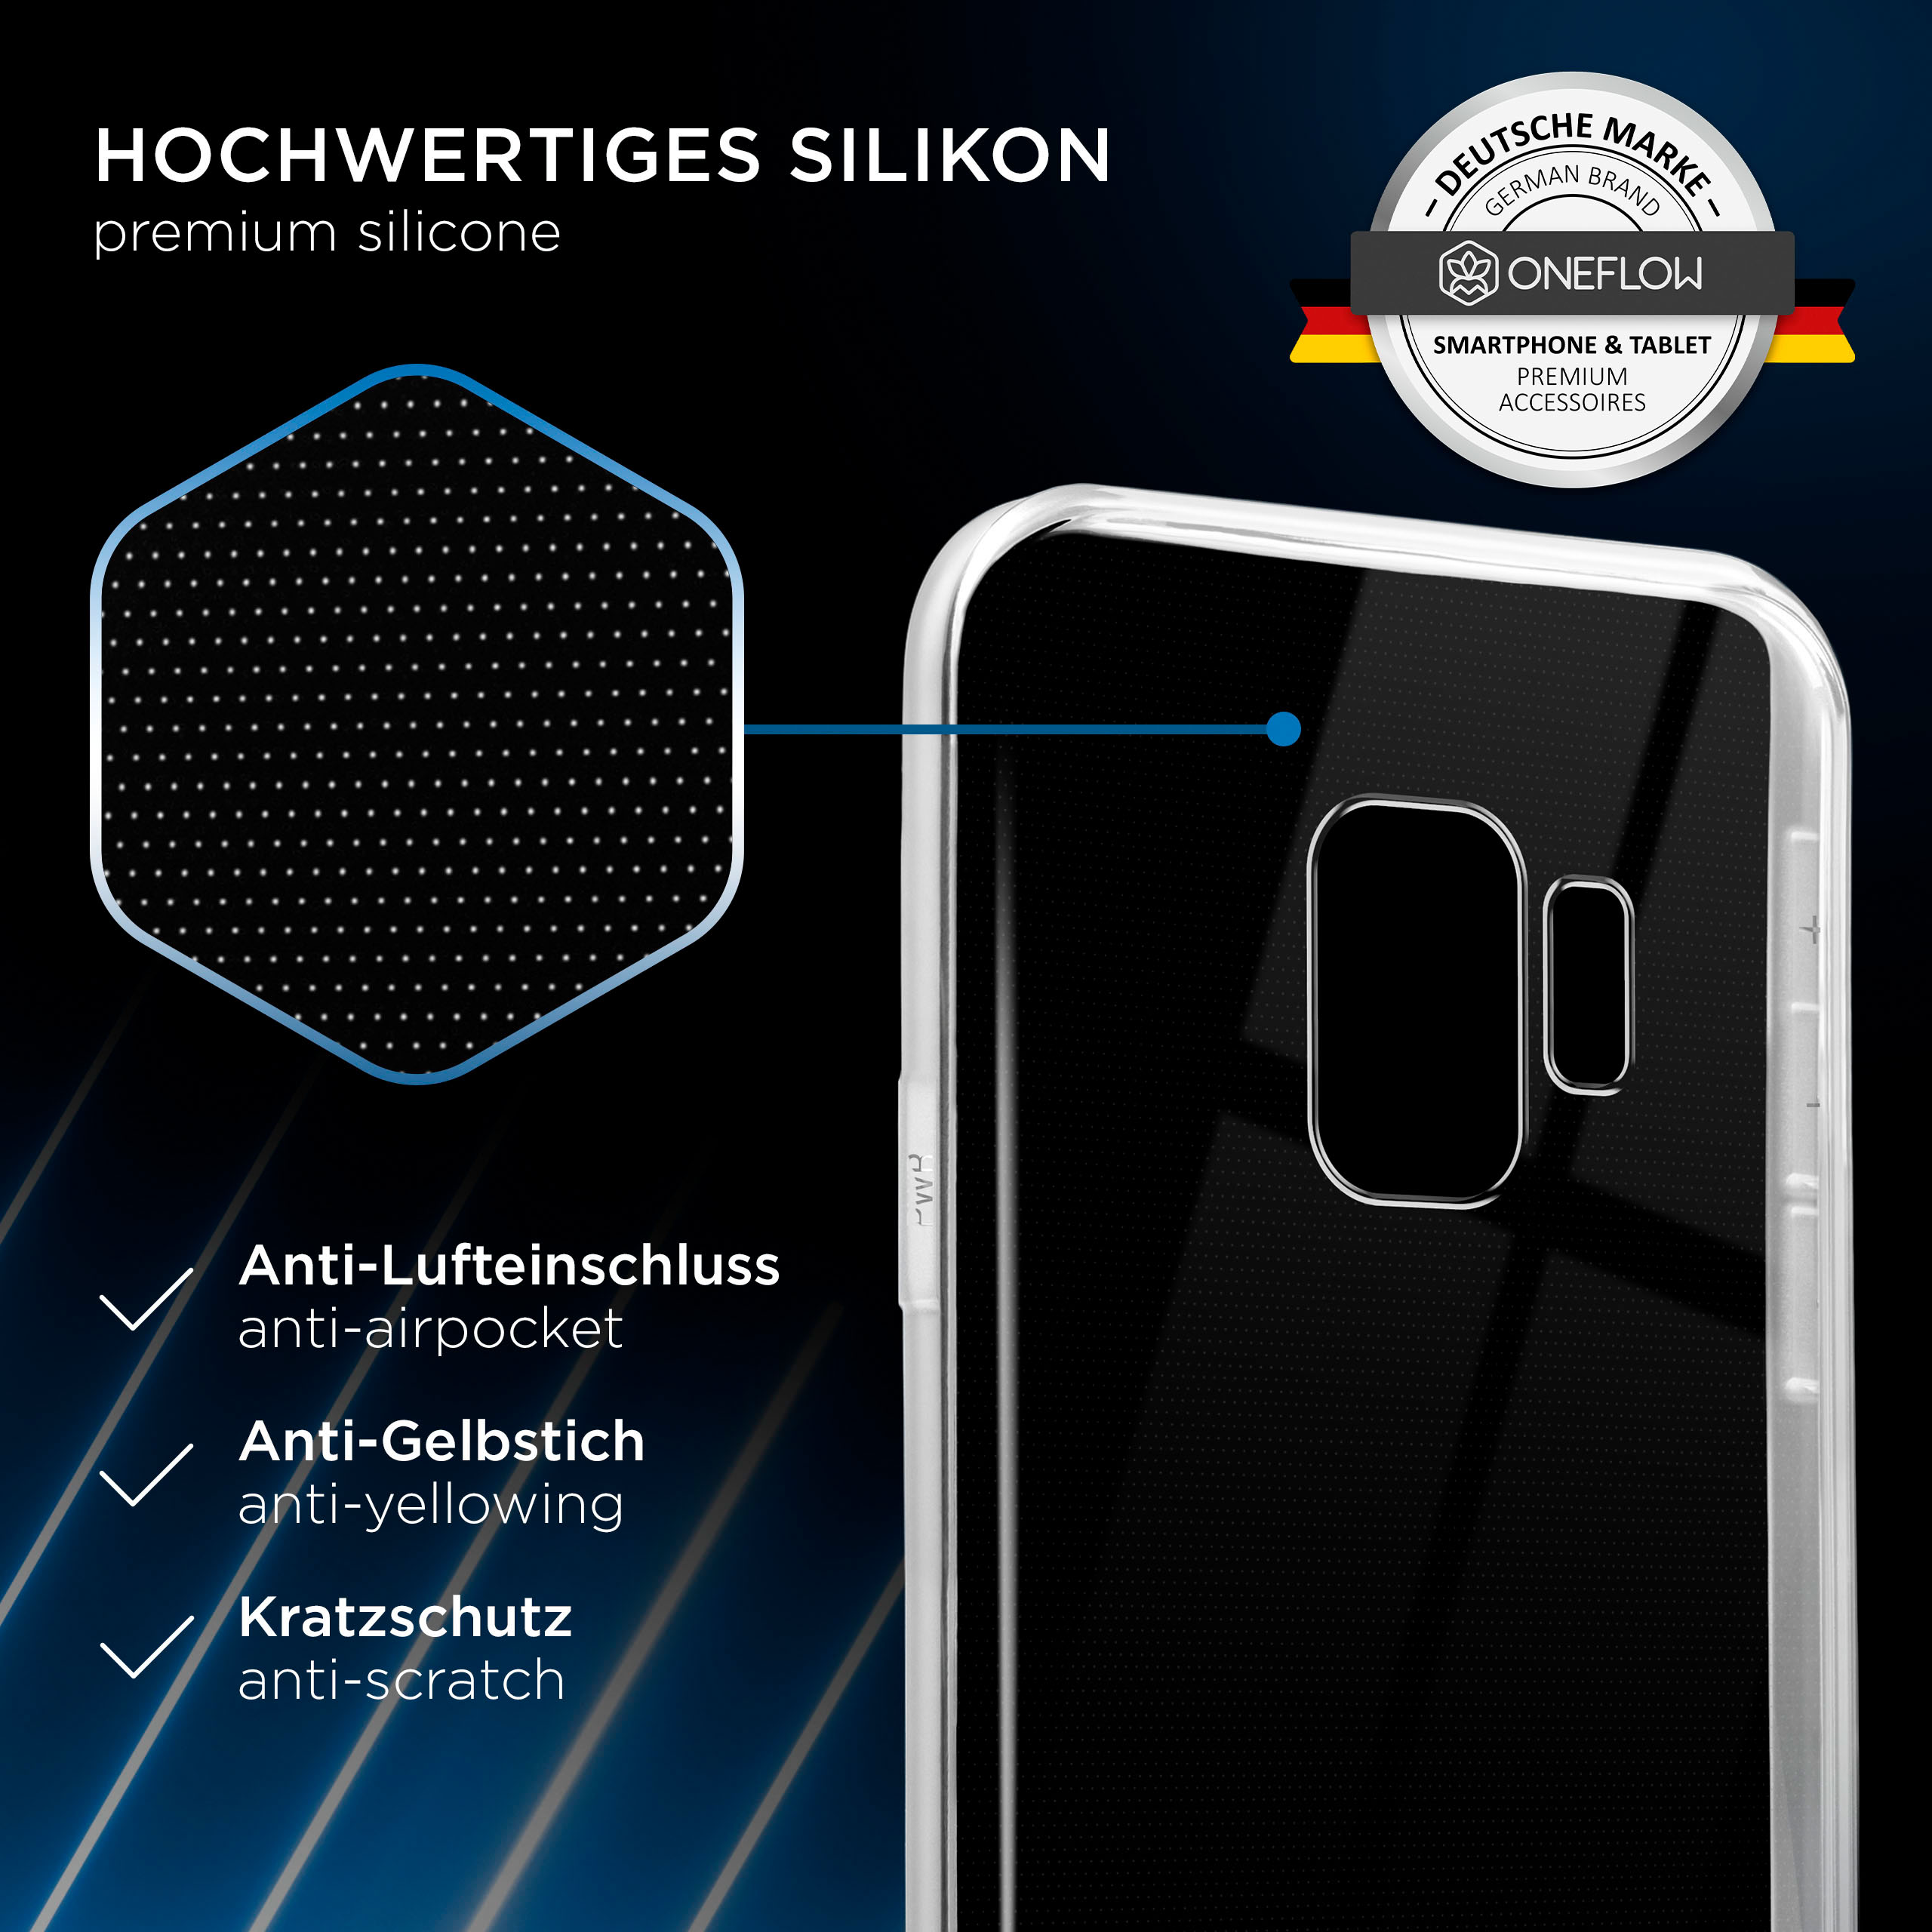 Clear Case, Backcover, ONEFLOW Galaxy S9, Samsung, Crystal-Clear